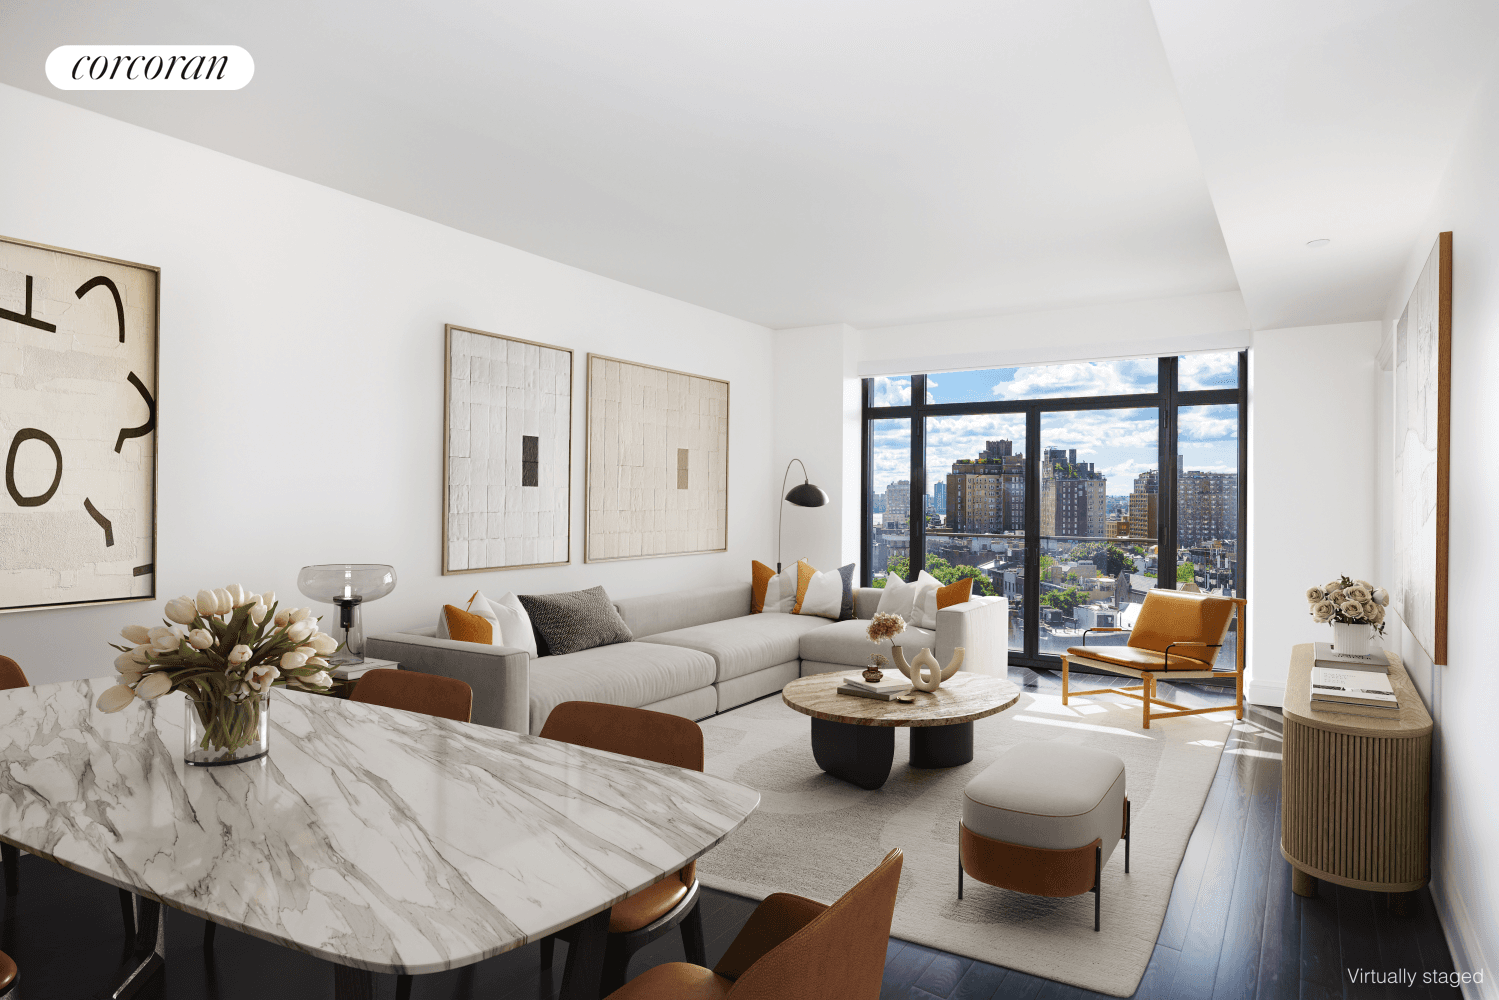 Perfectly perched on the 10th floor of the luxurious Greenwich Lane condominium, this spectacular corner residence features two bedrooms and two bathrooms.